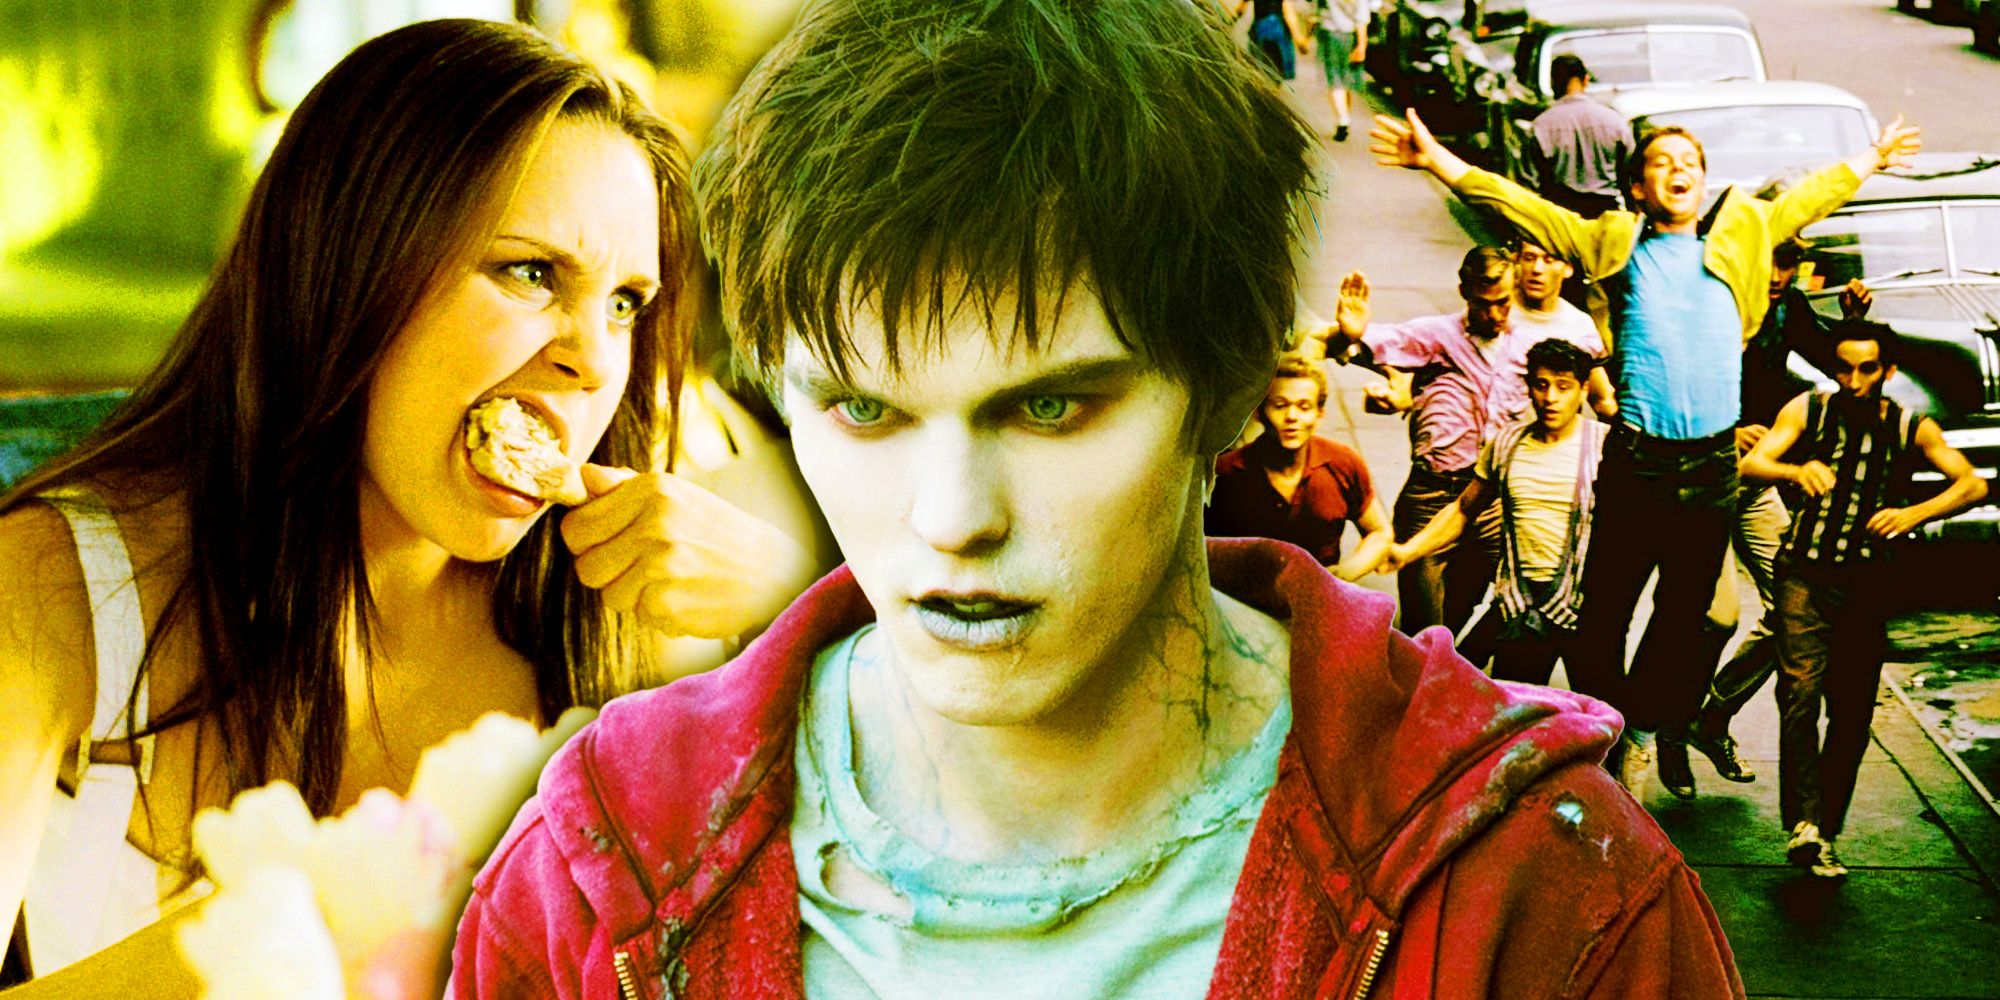 A custom image combining West Side Story, She's The Man, Warm Bodies 